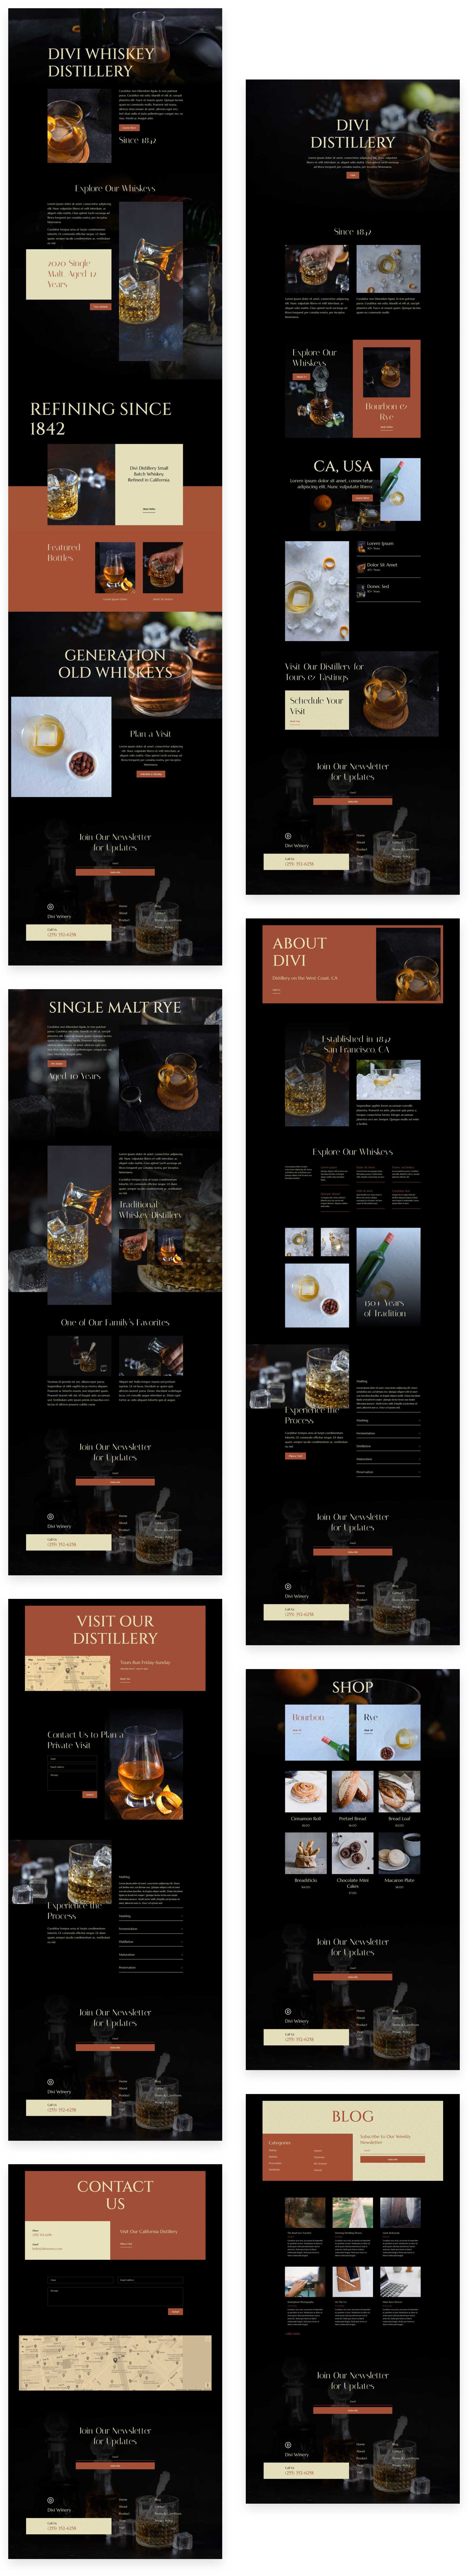 divi-whiskey-layout-pack-grid Get a Free Whiskey Distillery Layout Pack for Divi